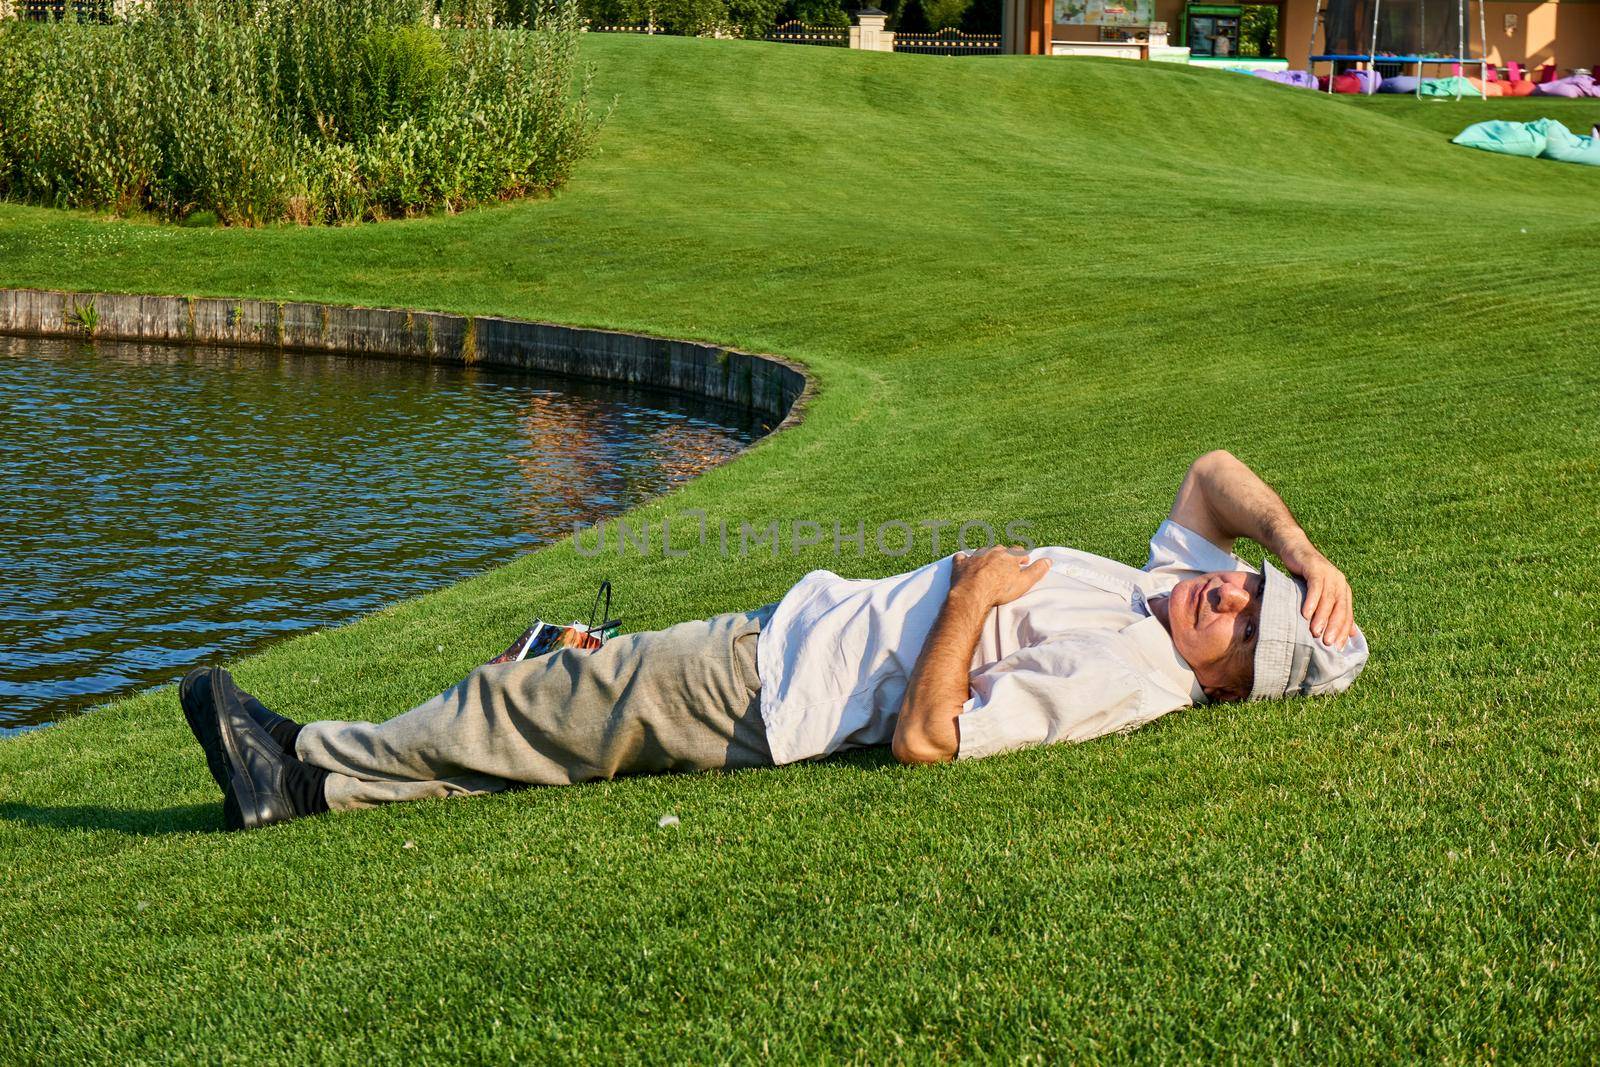 An elderly man is resting on a mowed lawn in a large field near a pond by jovani68